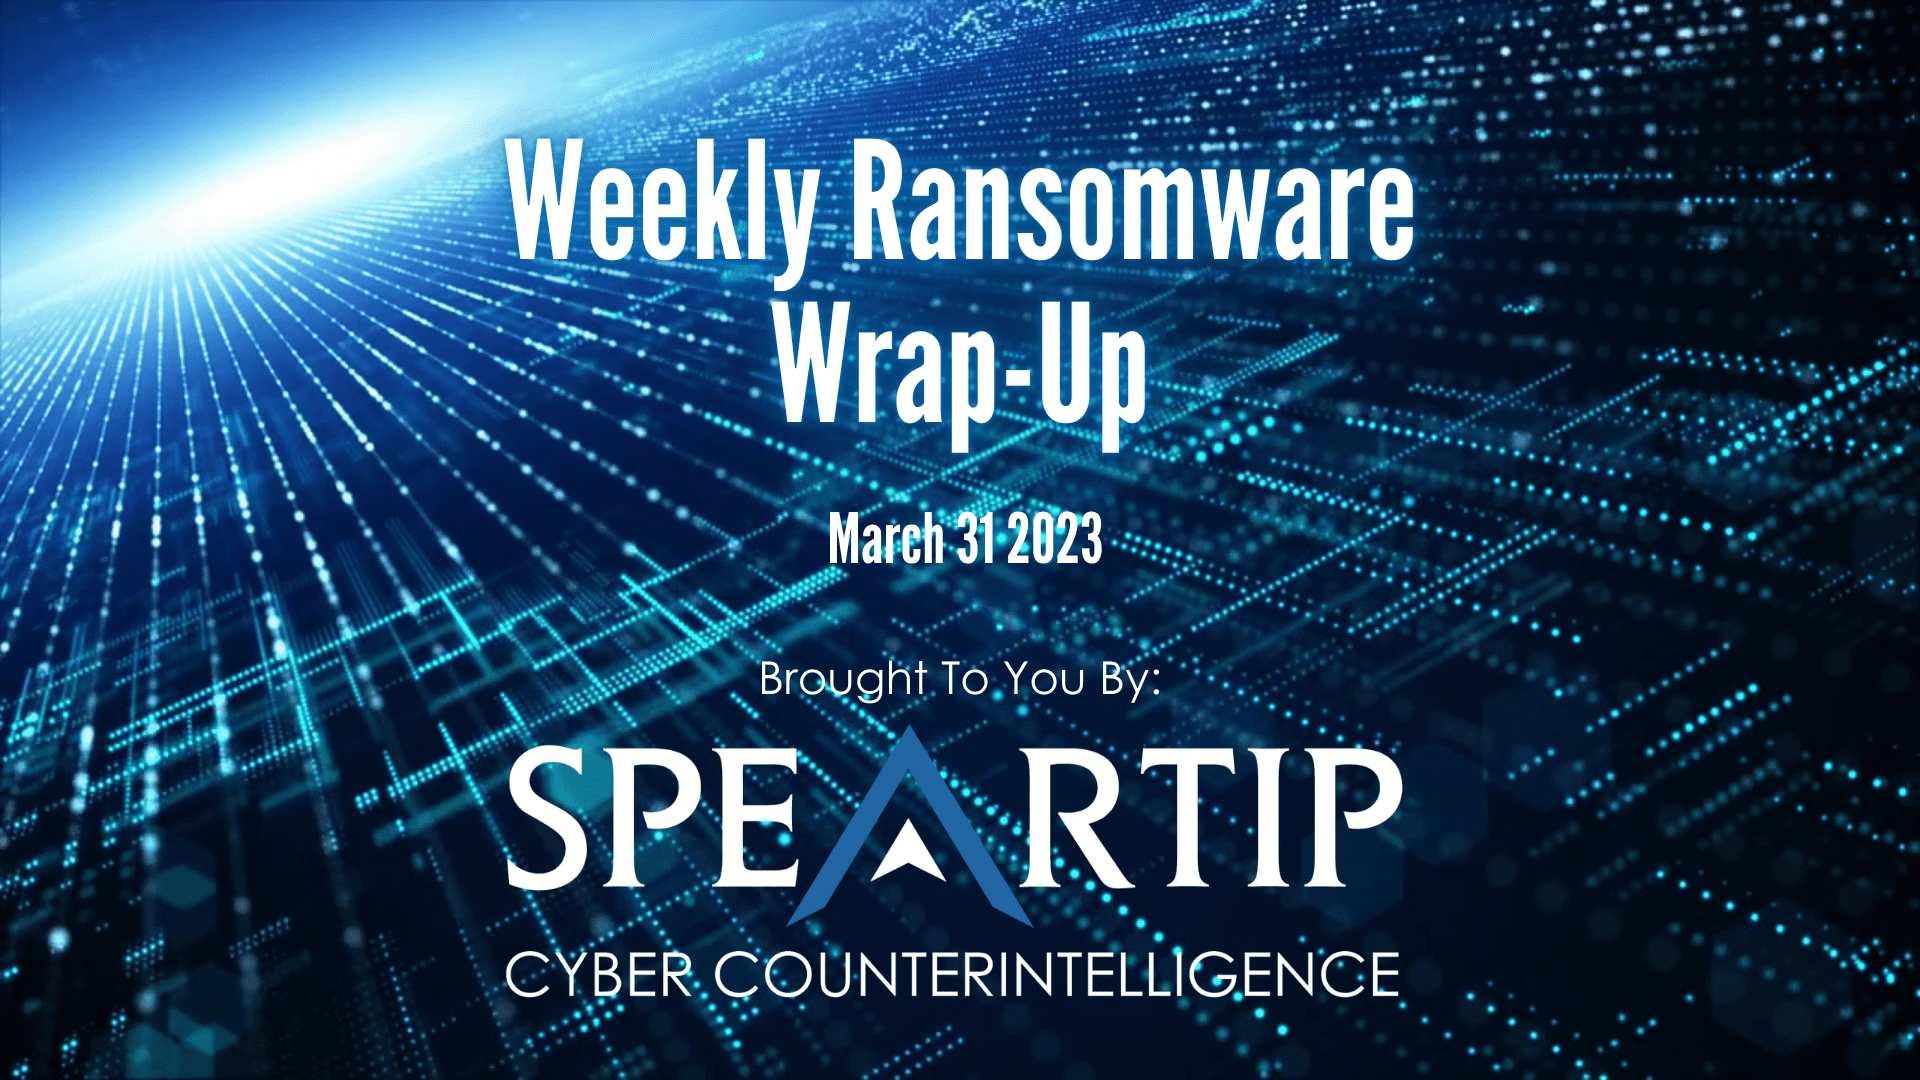 March 31, 2023 Ransomware Wrap-Up